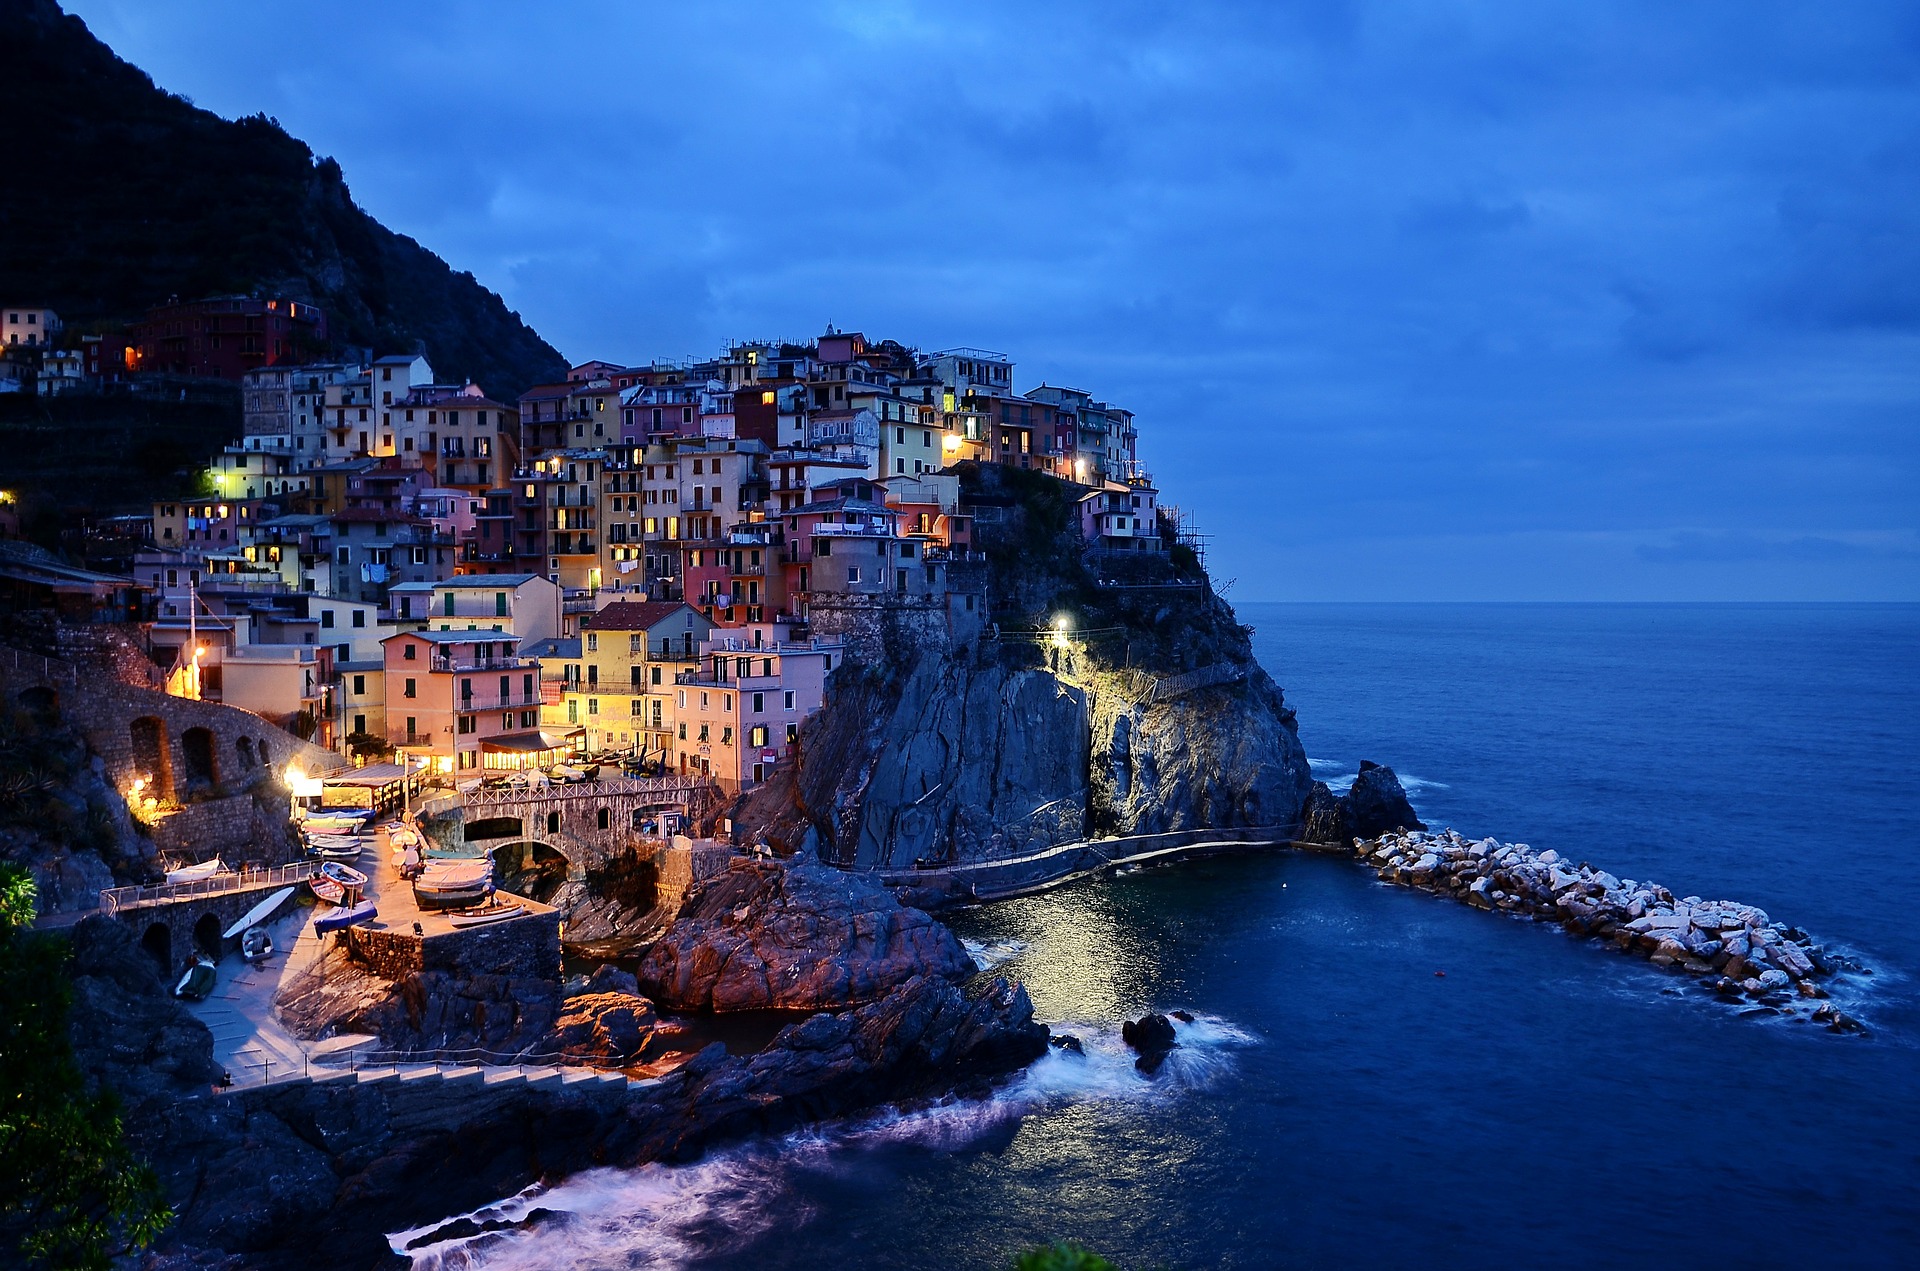 Italys' Cinque Terre is a rugged part of the Italian Riviera. Source: Pixabay